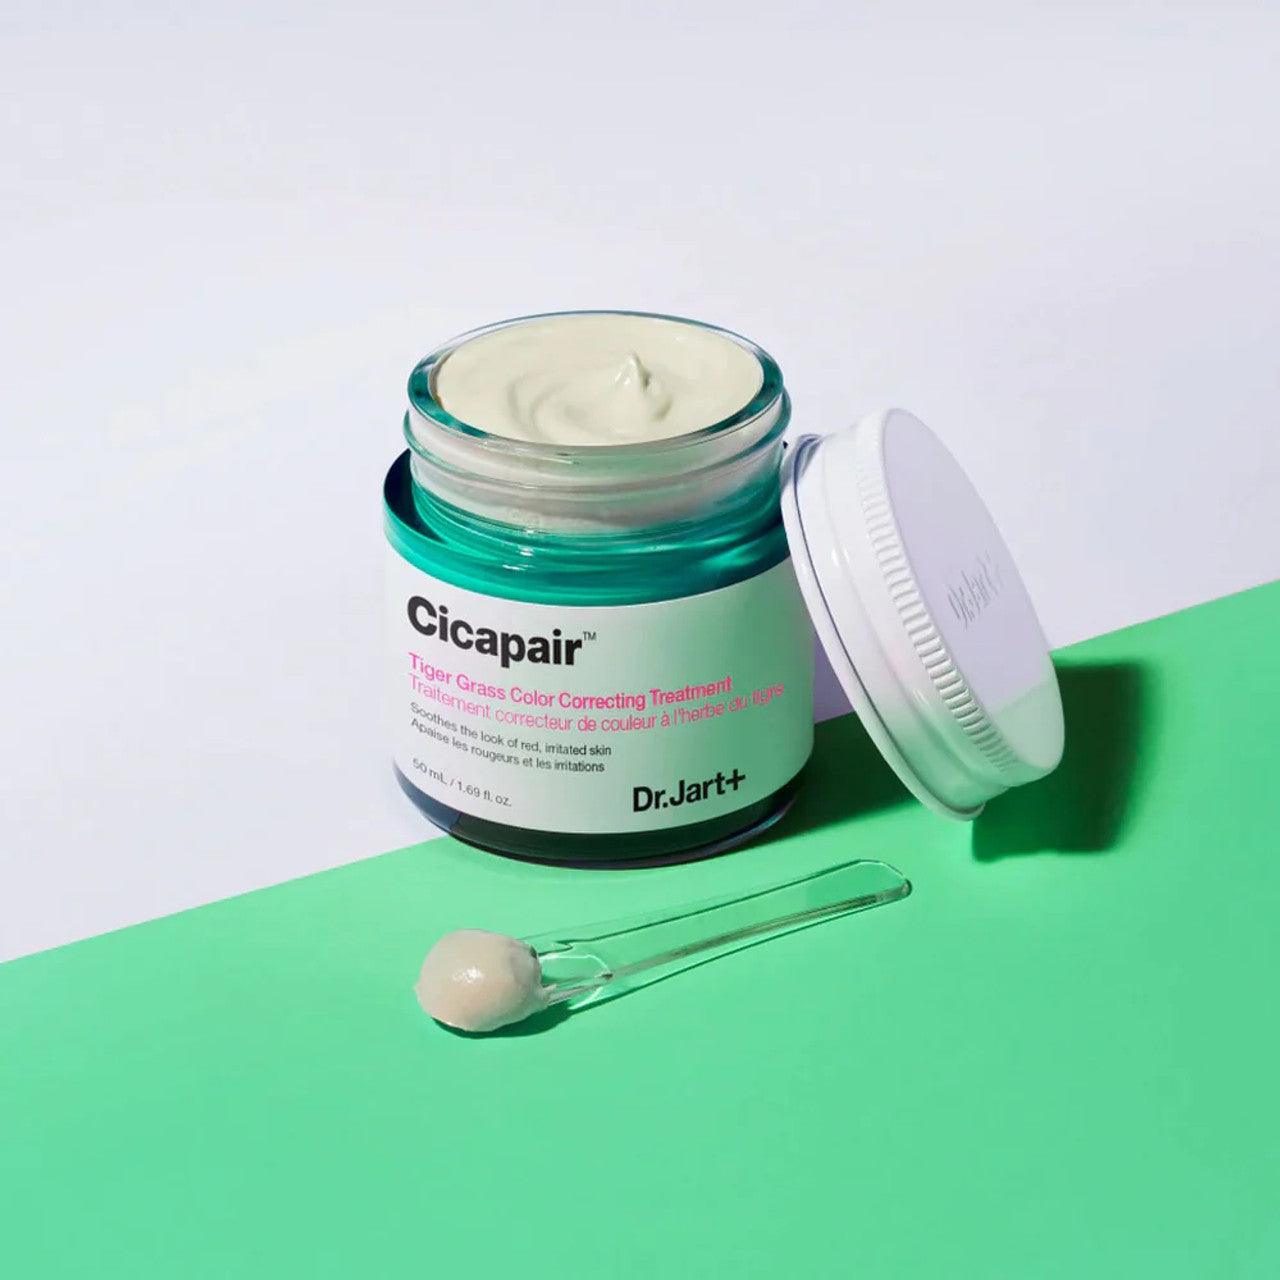 Cicapair Tiger Grass Color Correcting Treatment - 30 ml